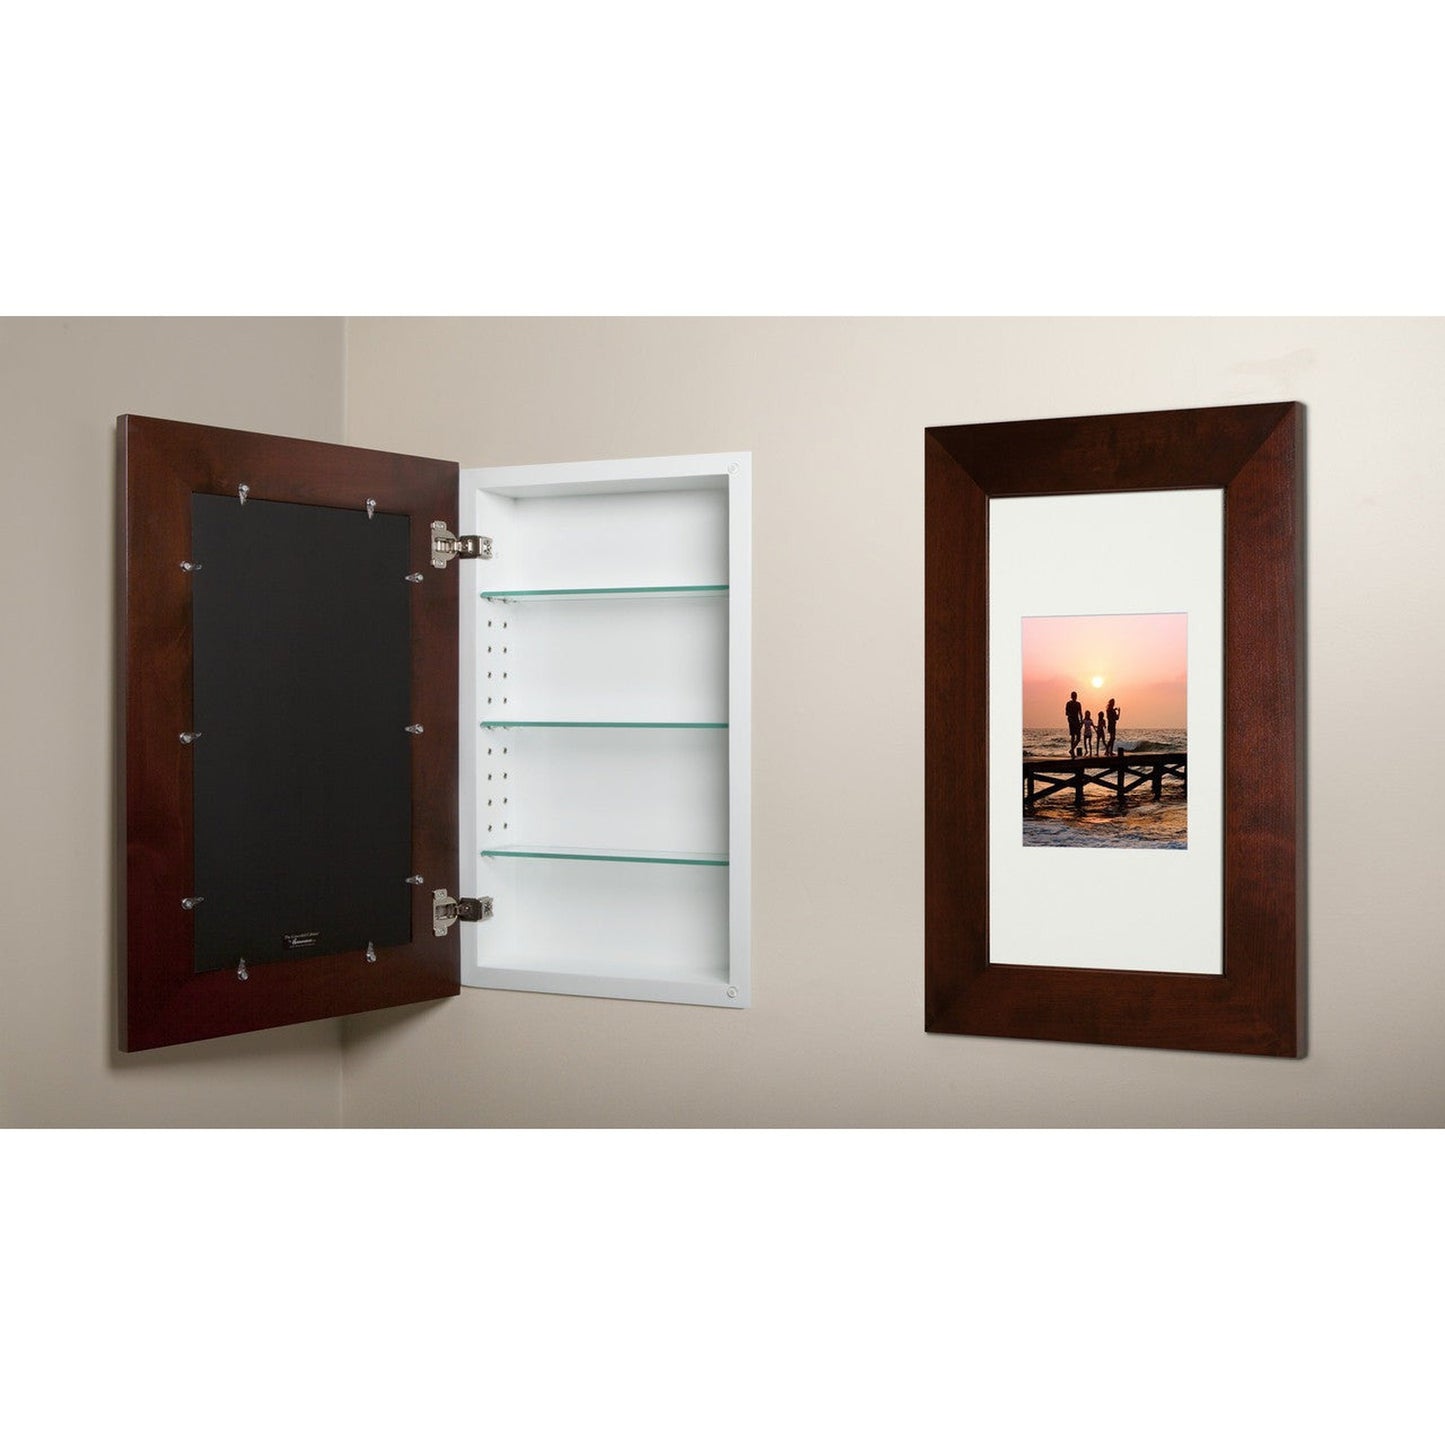 Fox Hollow Furnishings 14" x 24" Espresso Extra Large Standard 3.75" Depth White Interior Recessed Picture Frame Medicine Cabinet With Black Matting